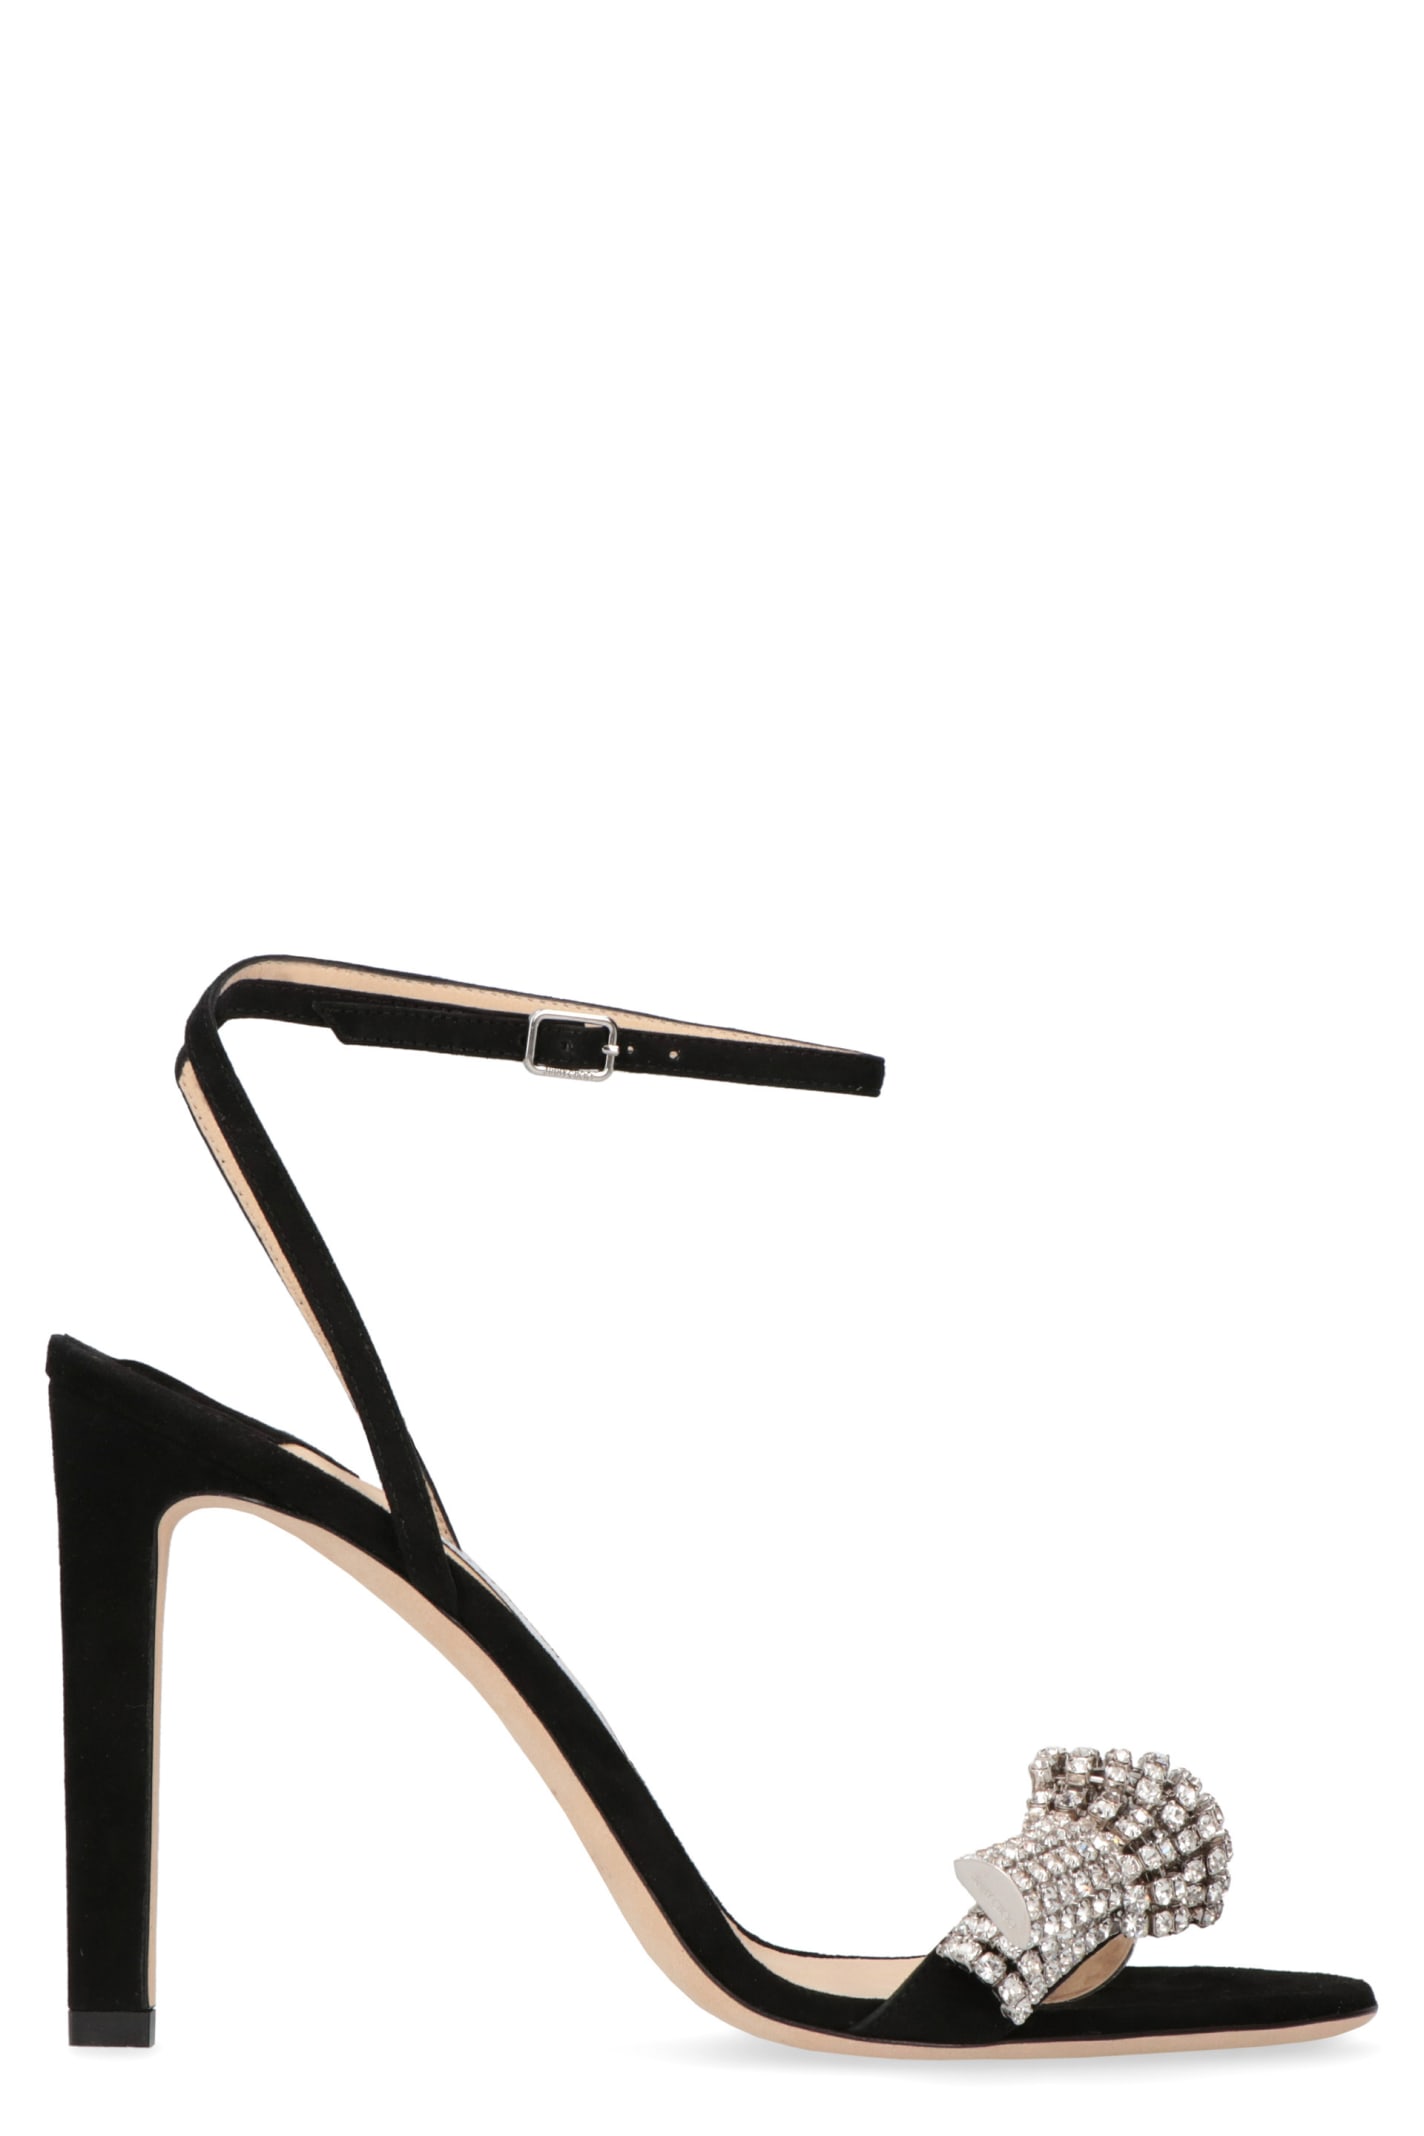 Buy Jimmy Choo Thyra Suede Sandals online, shop Jimmy Choo shoes with free shipping